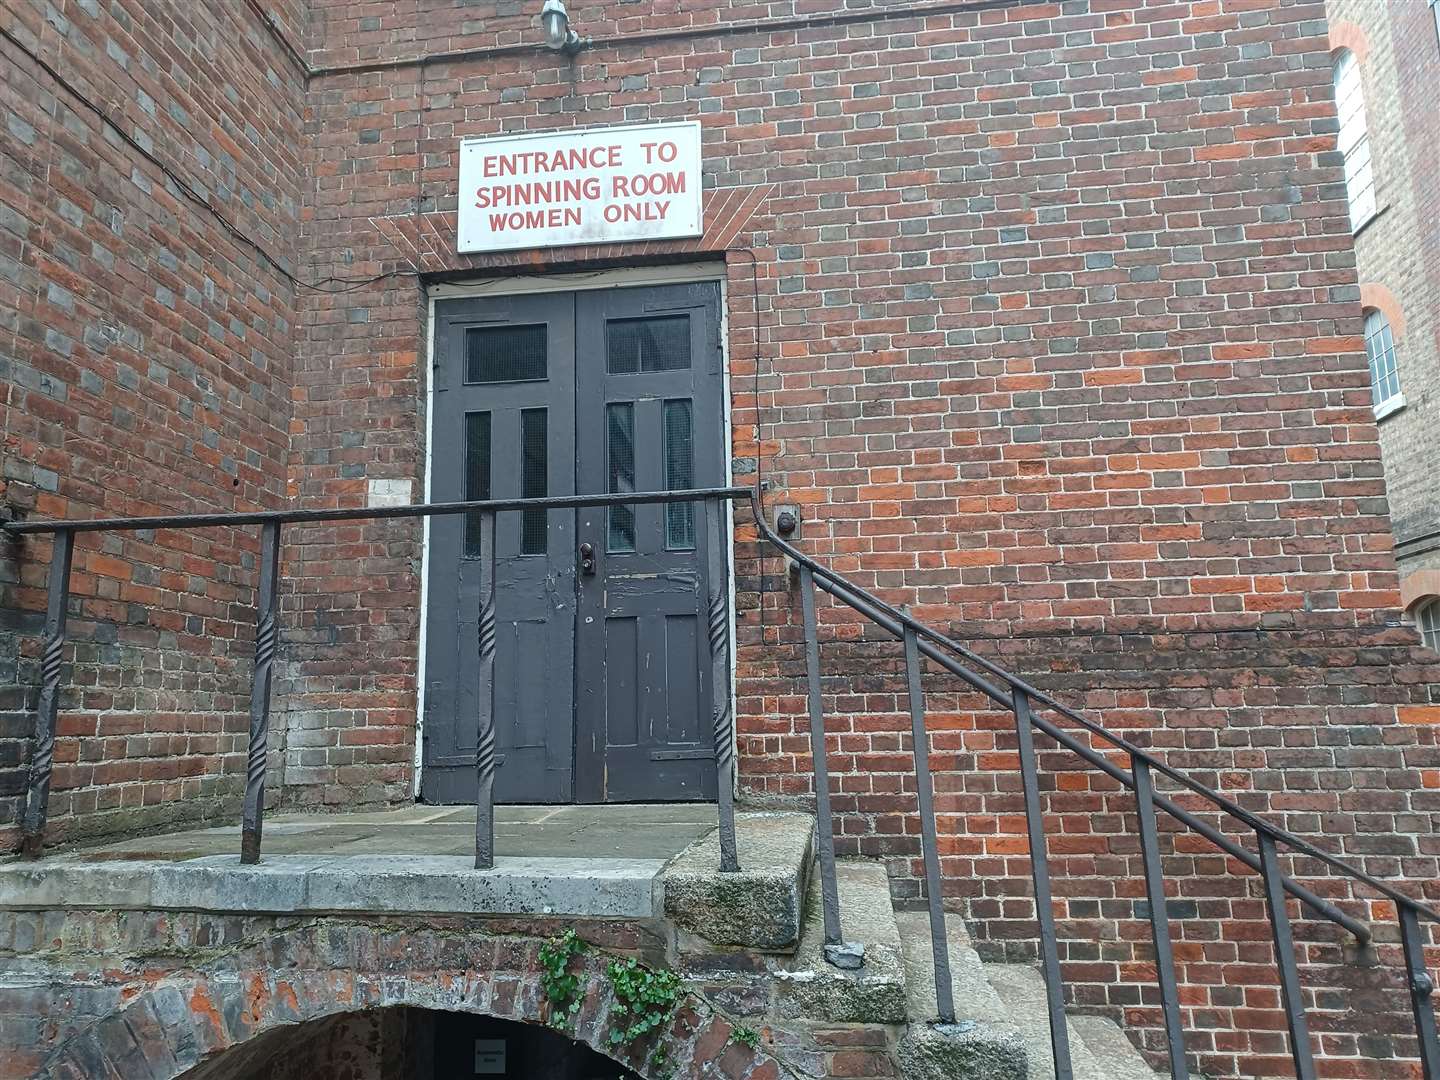 Entrance to the old spinning rooms